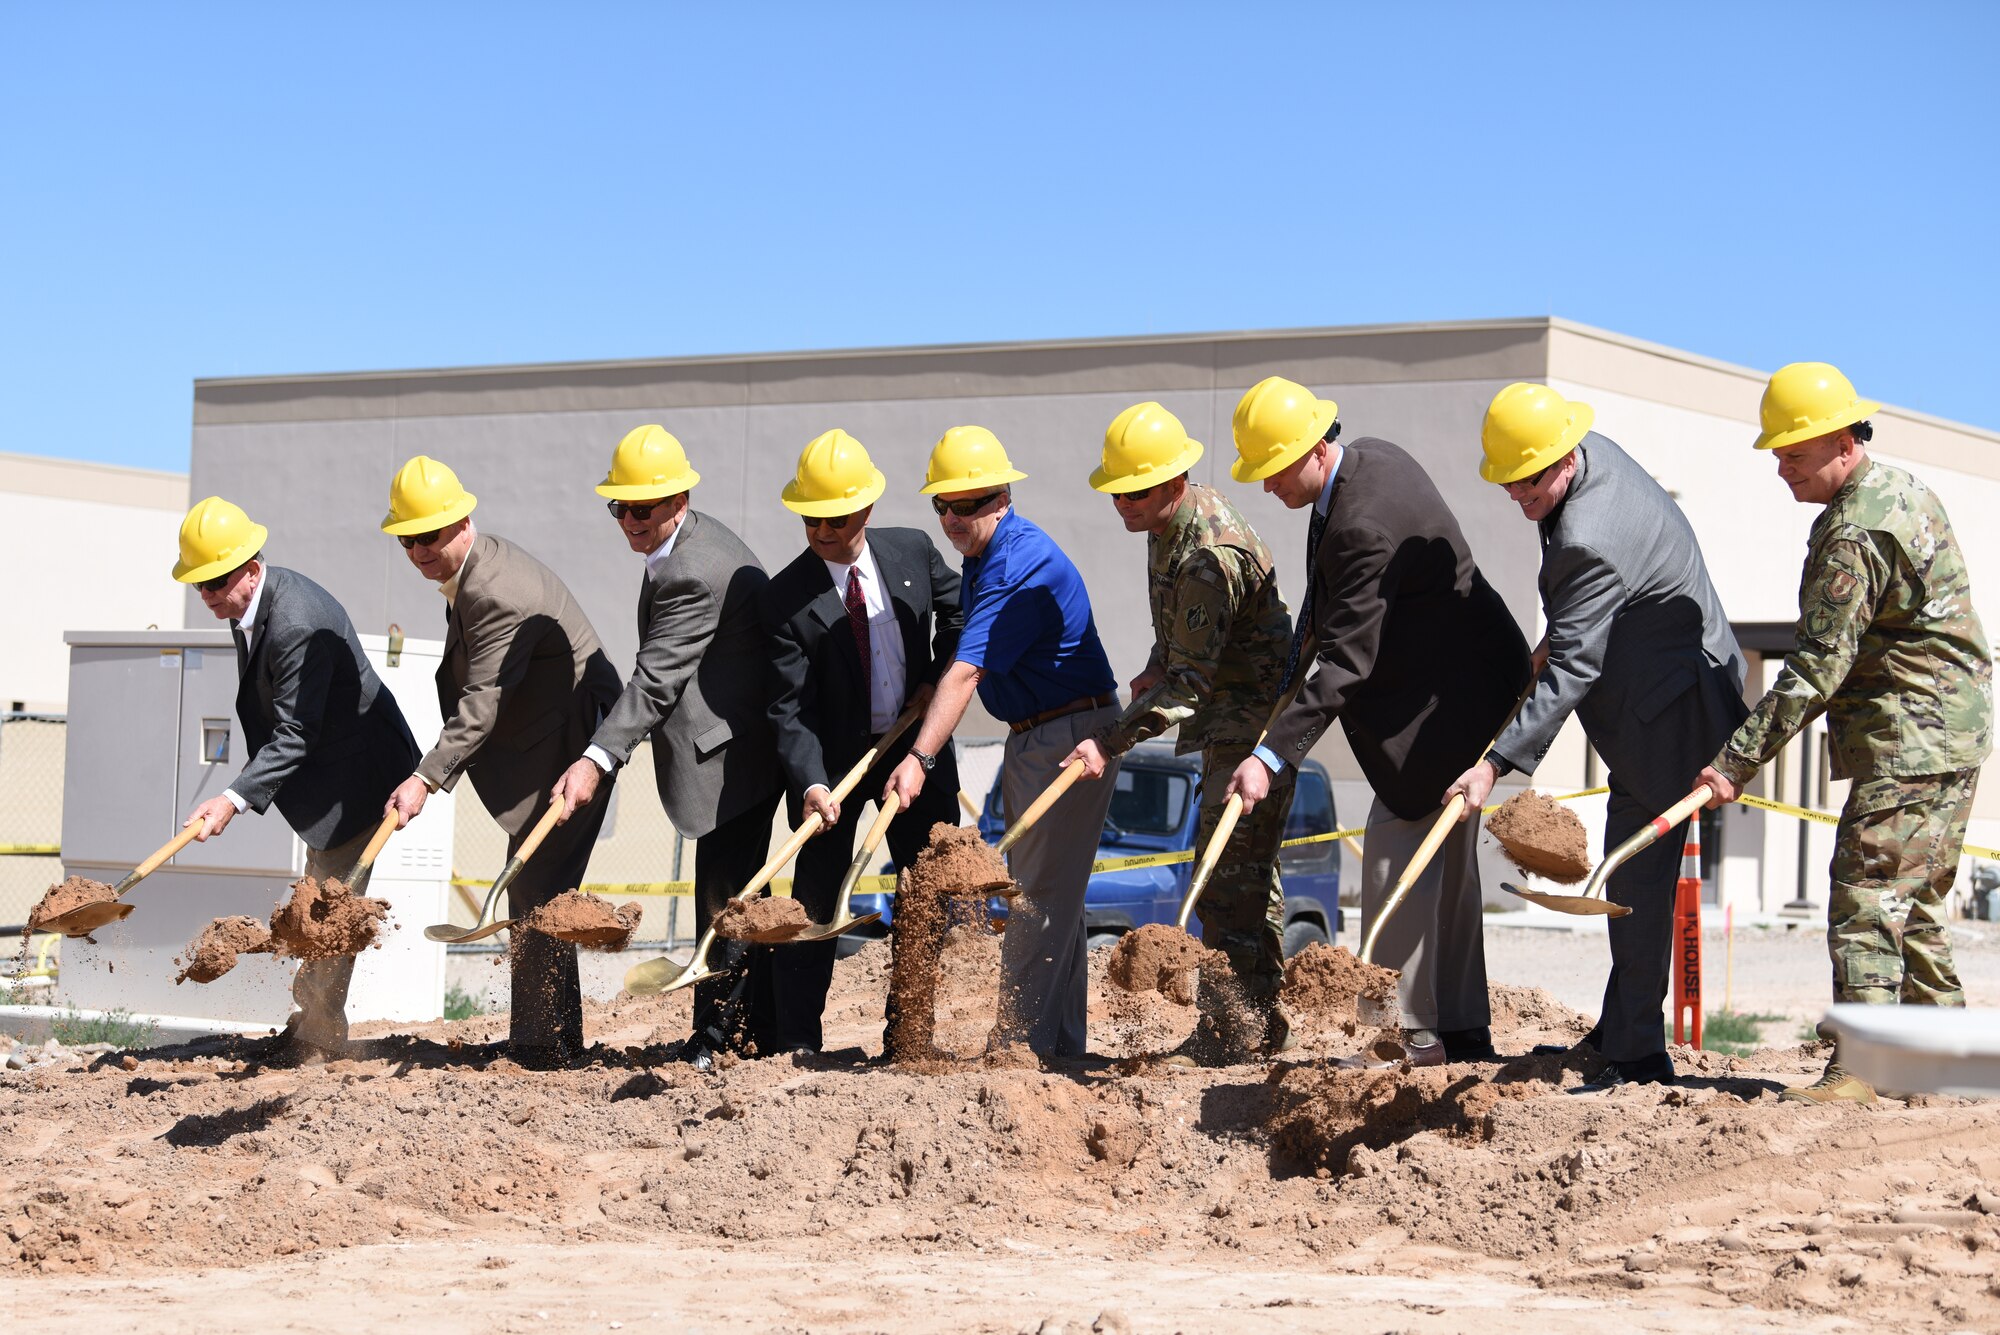 Members of the construction crew and Air Force Research Laboratory officially break ground on the Space Control Laboratory during a groundbreaking ceremony at Kirtland Air Force Base, N.M., June 6, 2019. The new laboratory is scheduled to be completed in July of 2020, and will have 26,000 square feet of laboratory, office and administrative space. (U.S. Air Force photo by Senior Airman Eli Chevalier)